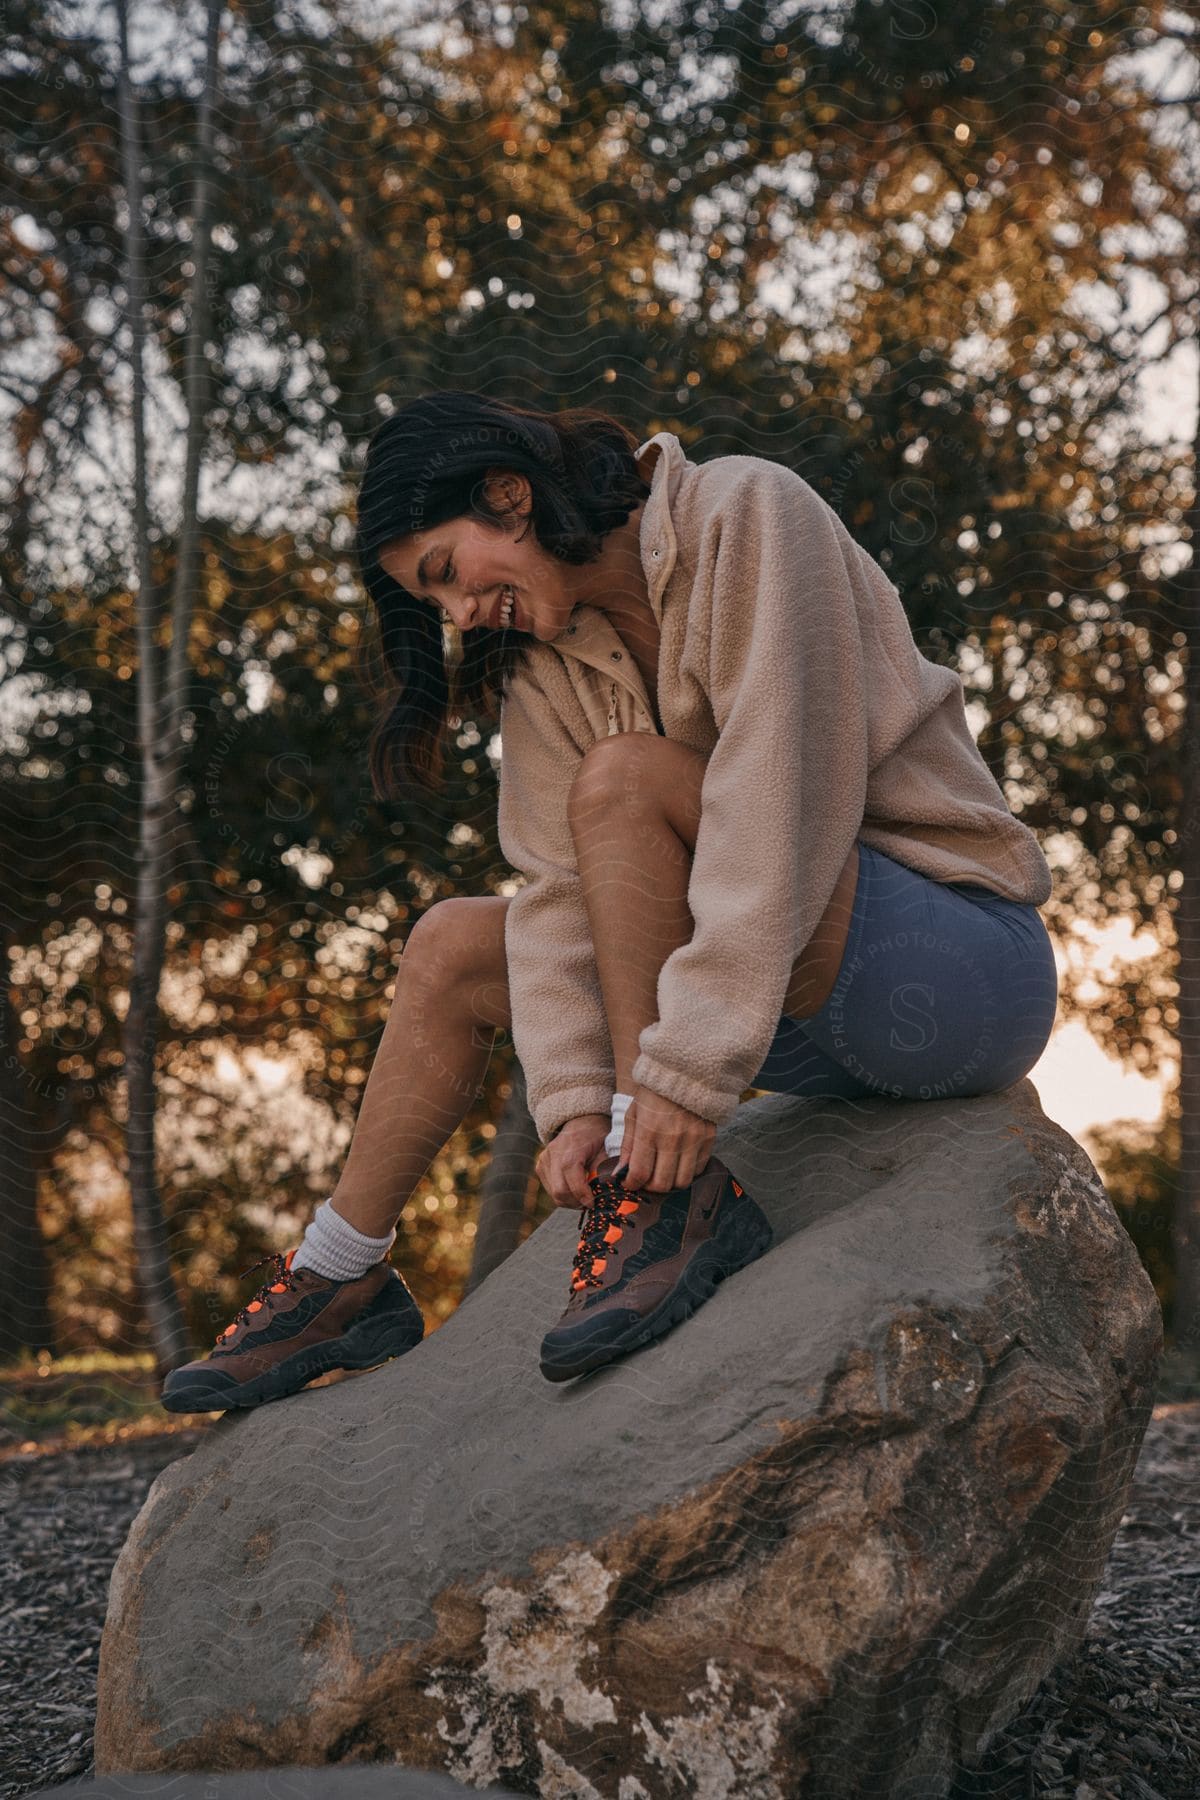 Woman tying shoe laces on a rock outdoors with trees in the background at dusk.